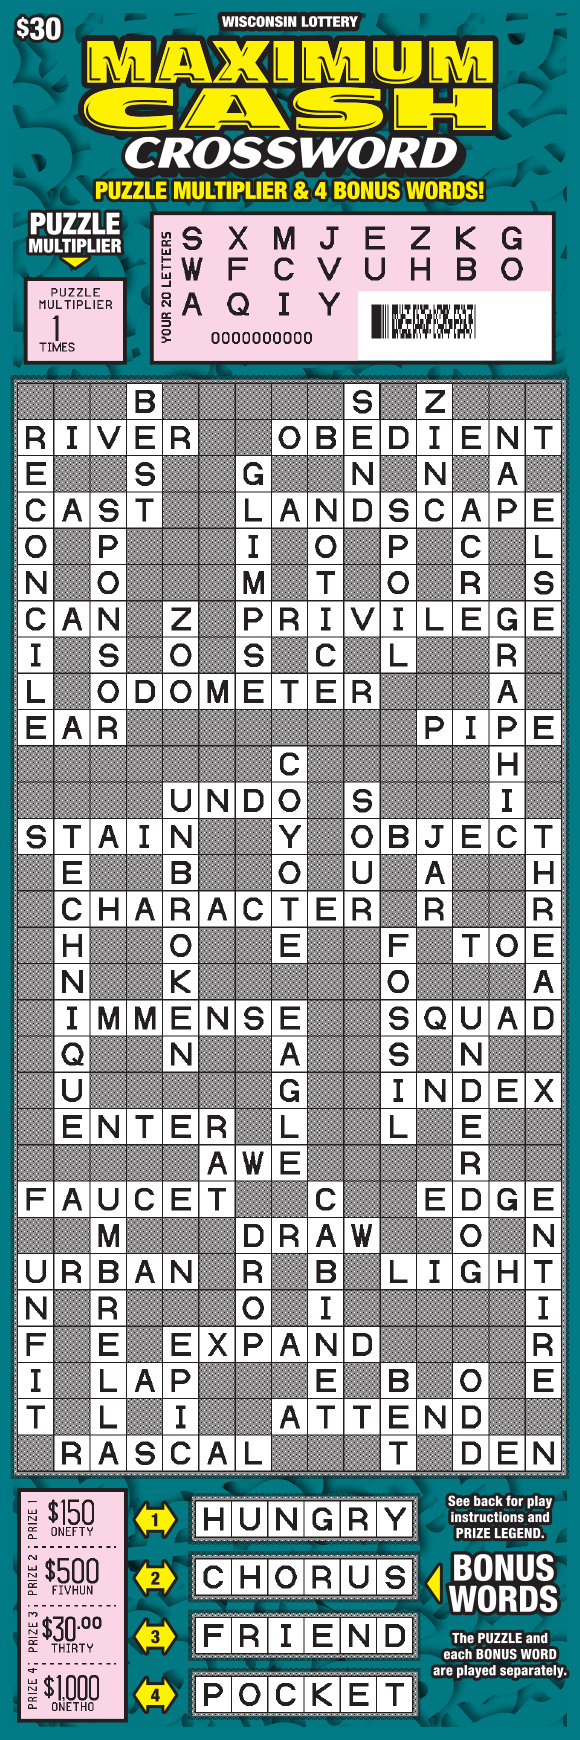 Wisconsin Scratch Game, Maximum Cash Crossword teal background with yellow text, scratched.